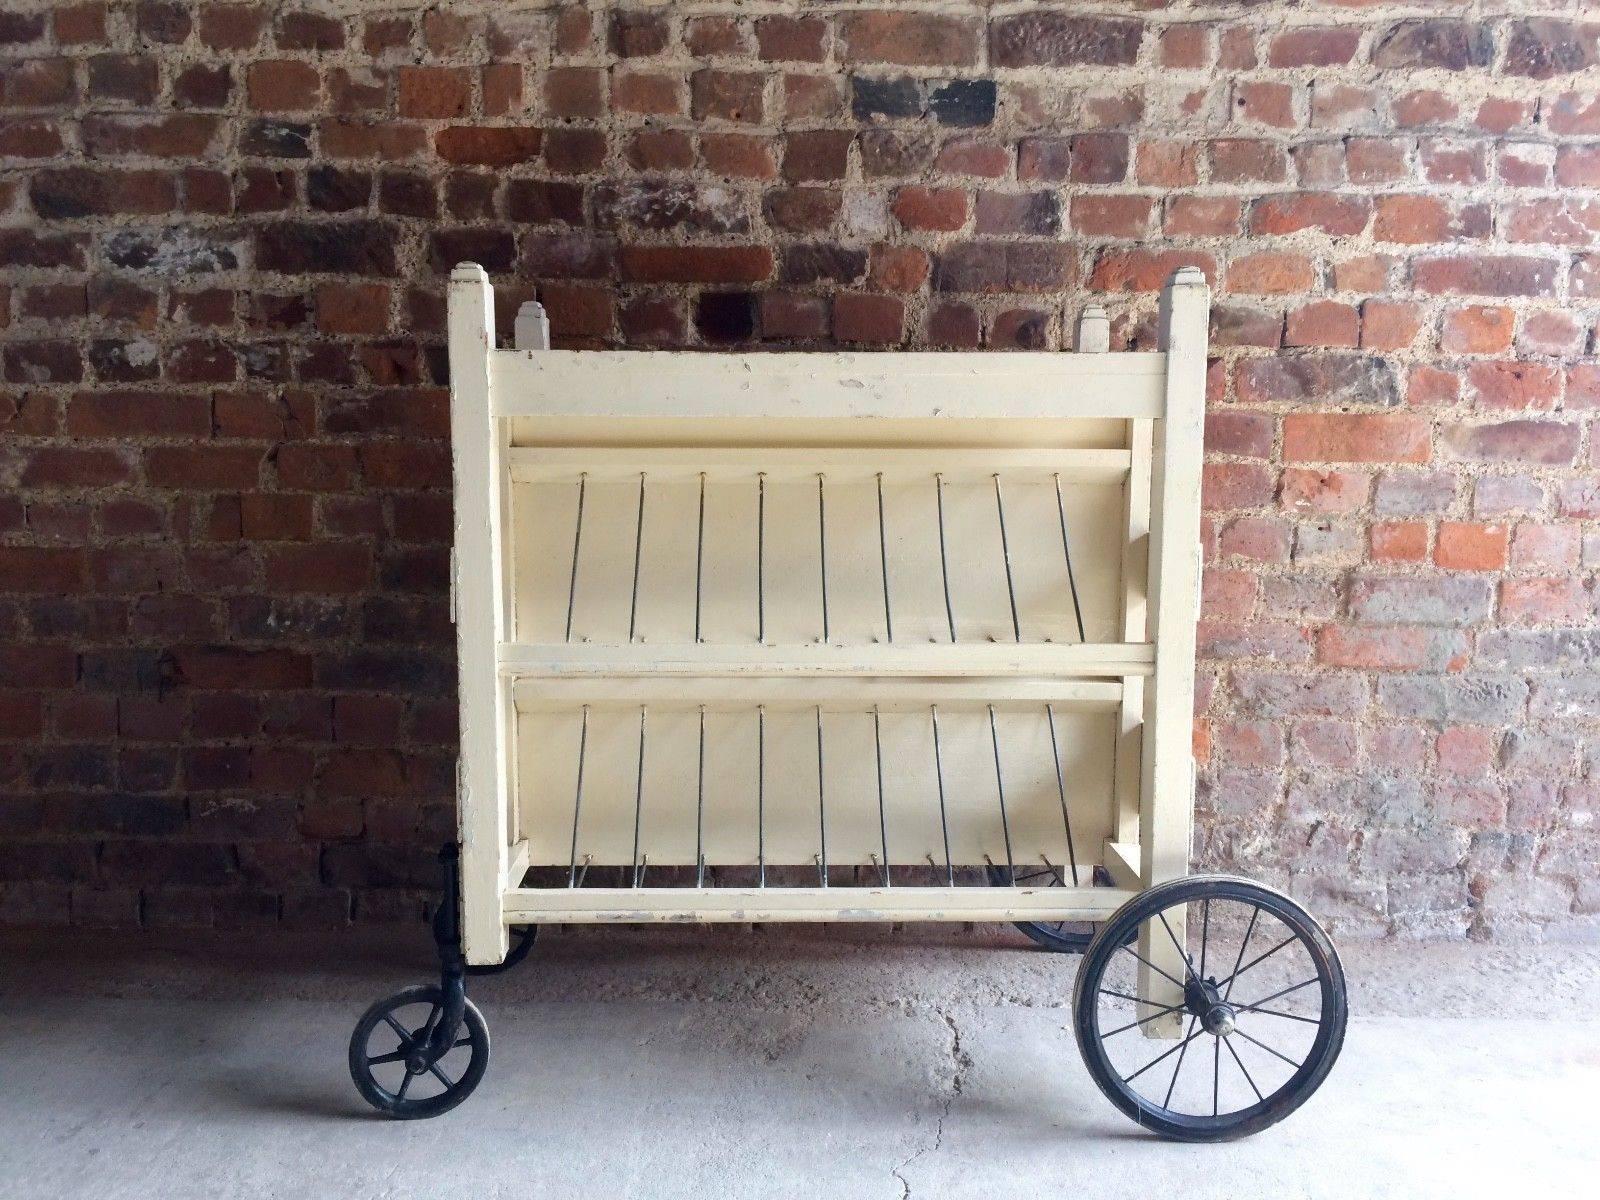 A stunningly beautiful 20th century scratch built former prison library trolley in white
paint, with vintage wheels and wire racking, offered in great vintage condition knocks
and marks adding to the overall character and charm of the piece, looks